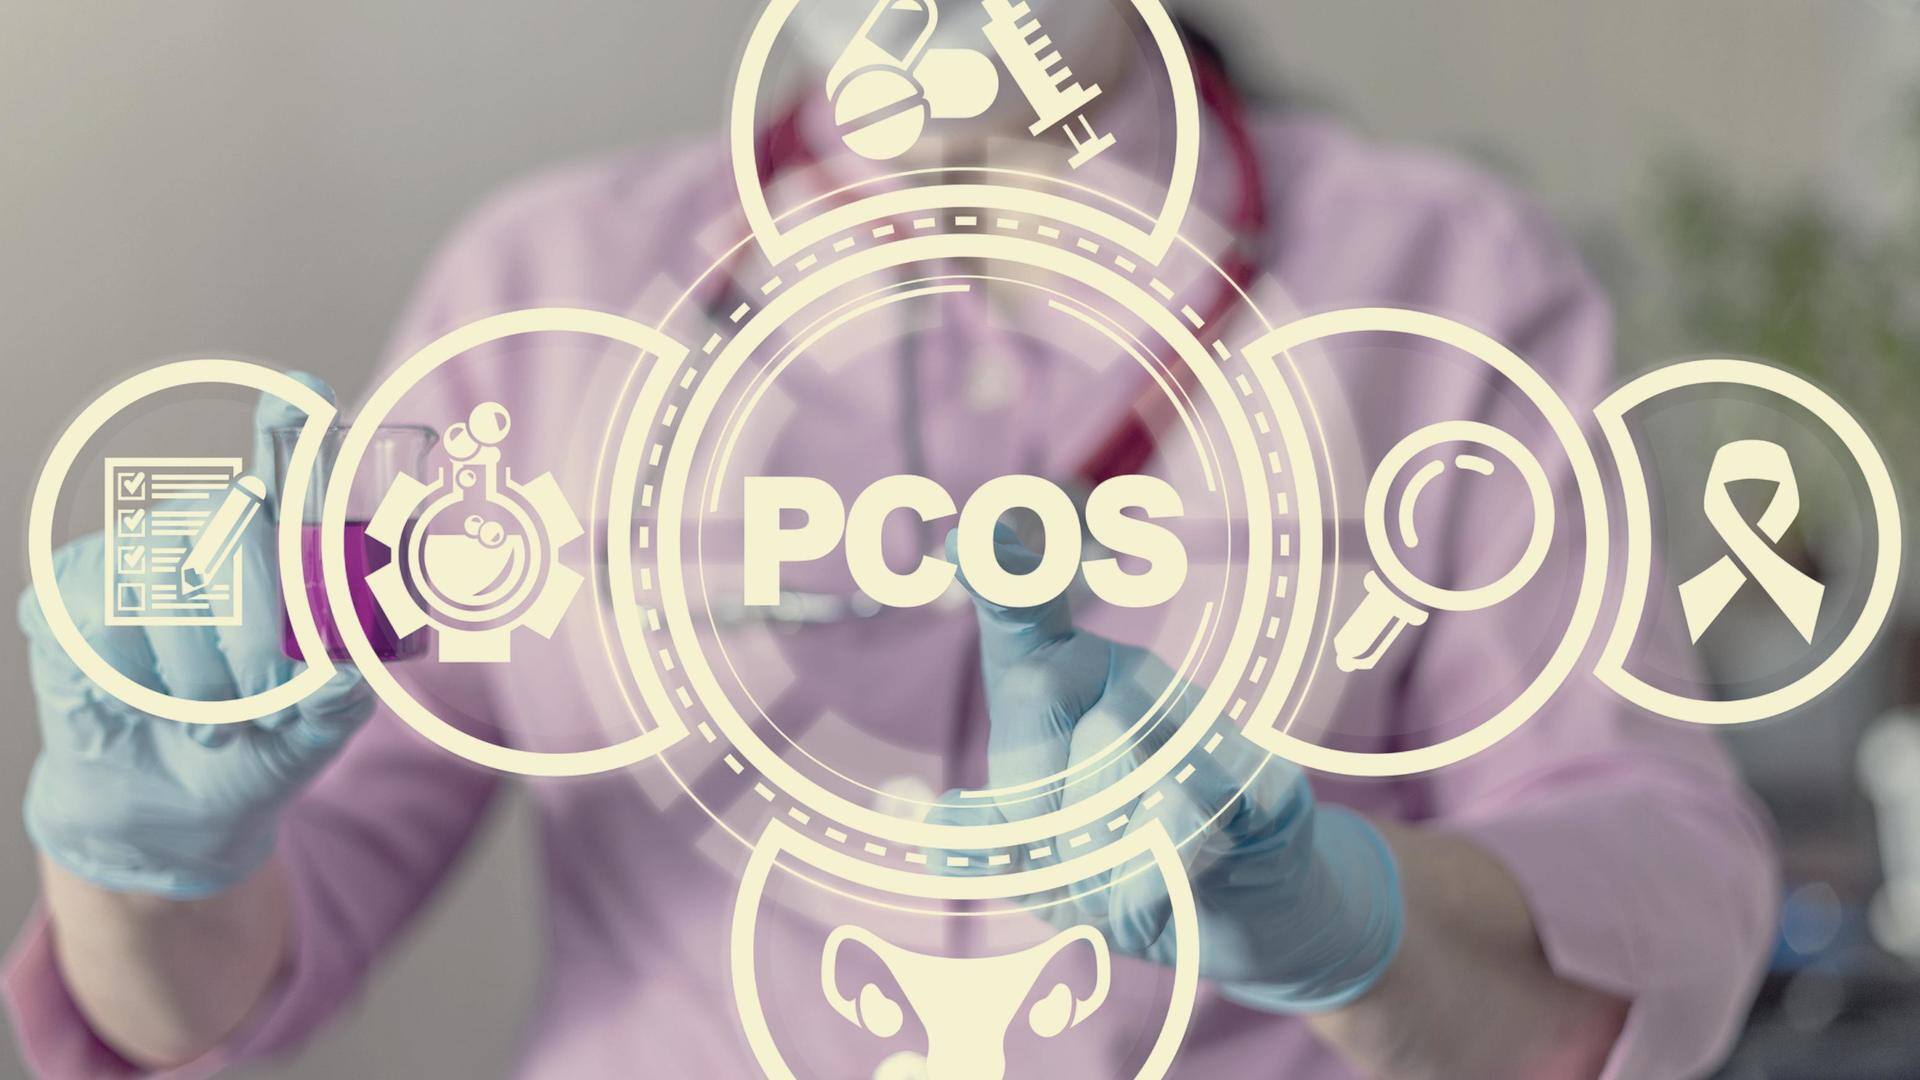 Does a woman's PCOS affect her sons? Let's understand